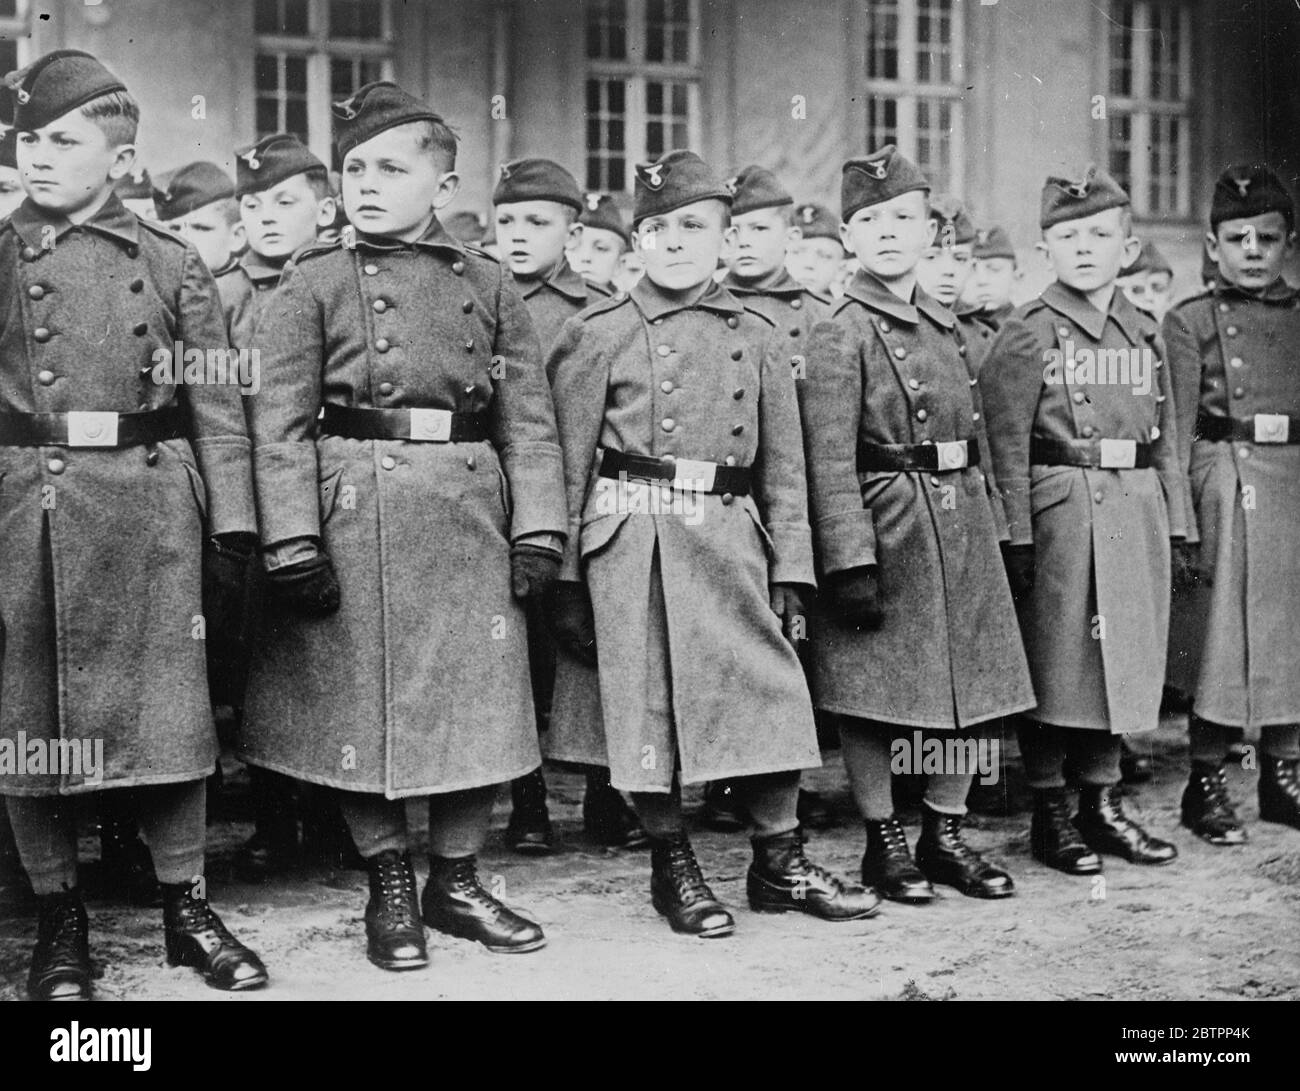 Growing up, the soldiers. Boys belonging to the the military orphanage at Potsdam, wearing their smart uniforms at the official 'handing over' ceremony of the Orphanage. The orphanage has been established under the protection of the army to give shelter to military orphans. 29 January 1938 Stock Photo